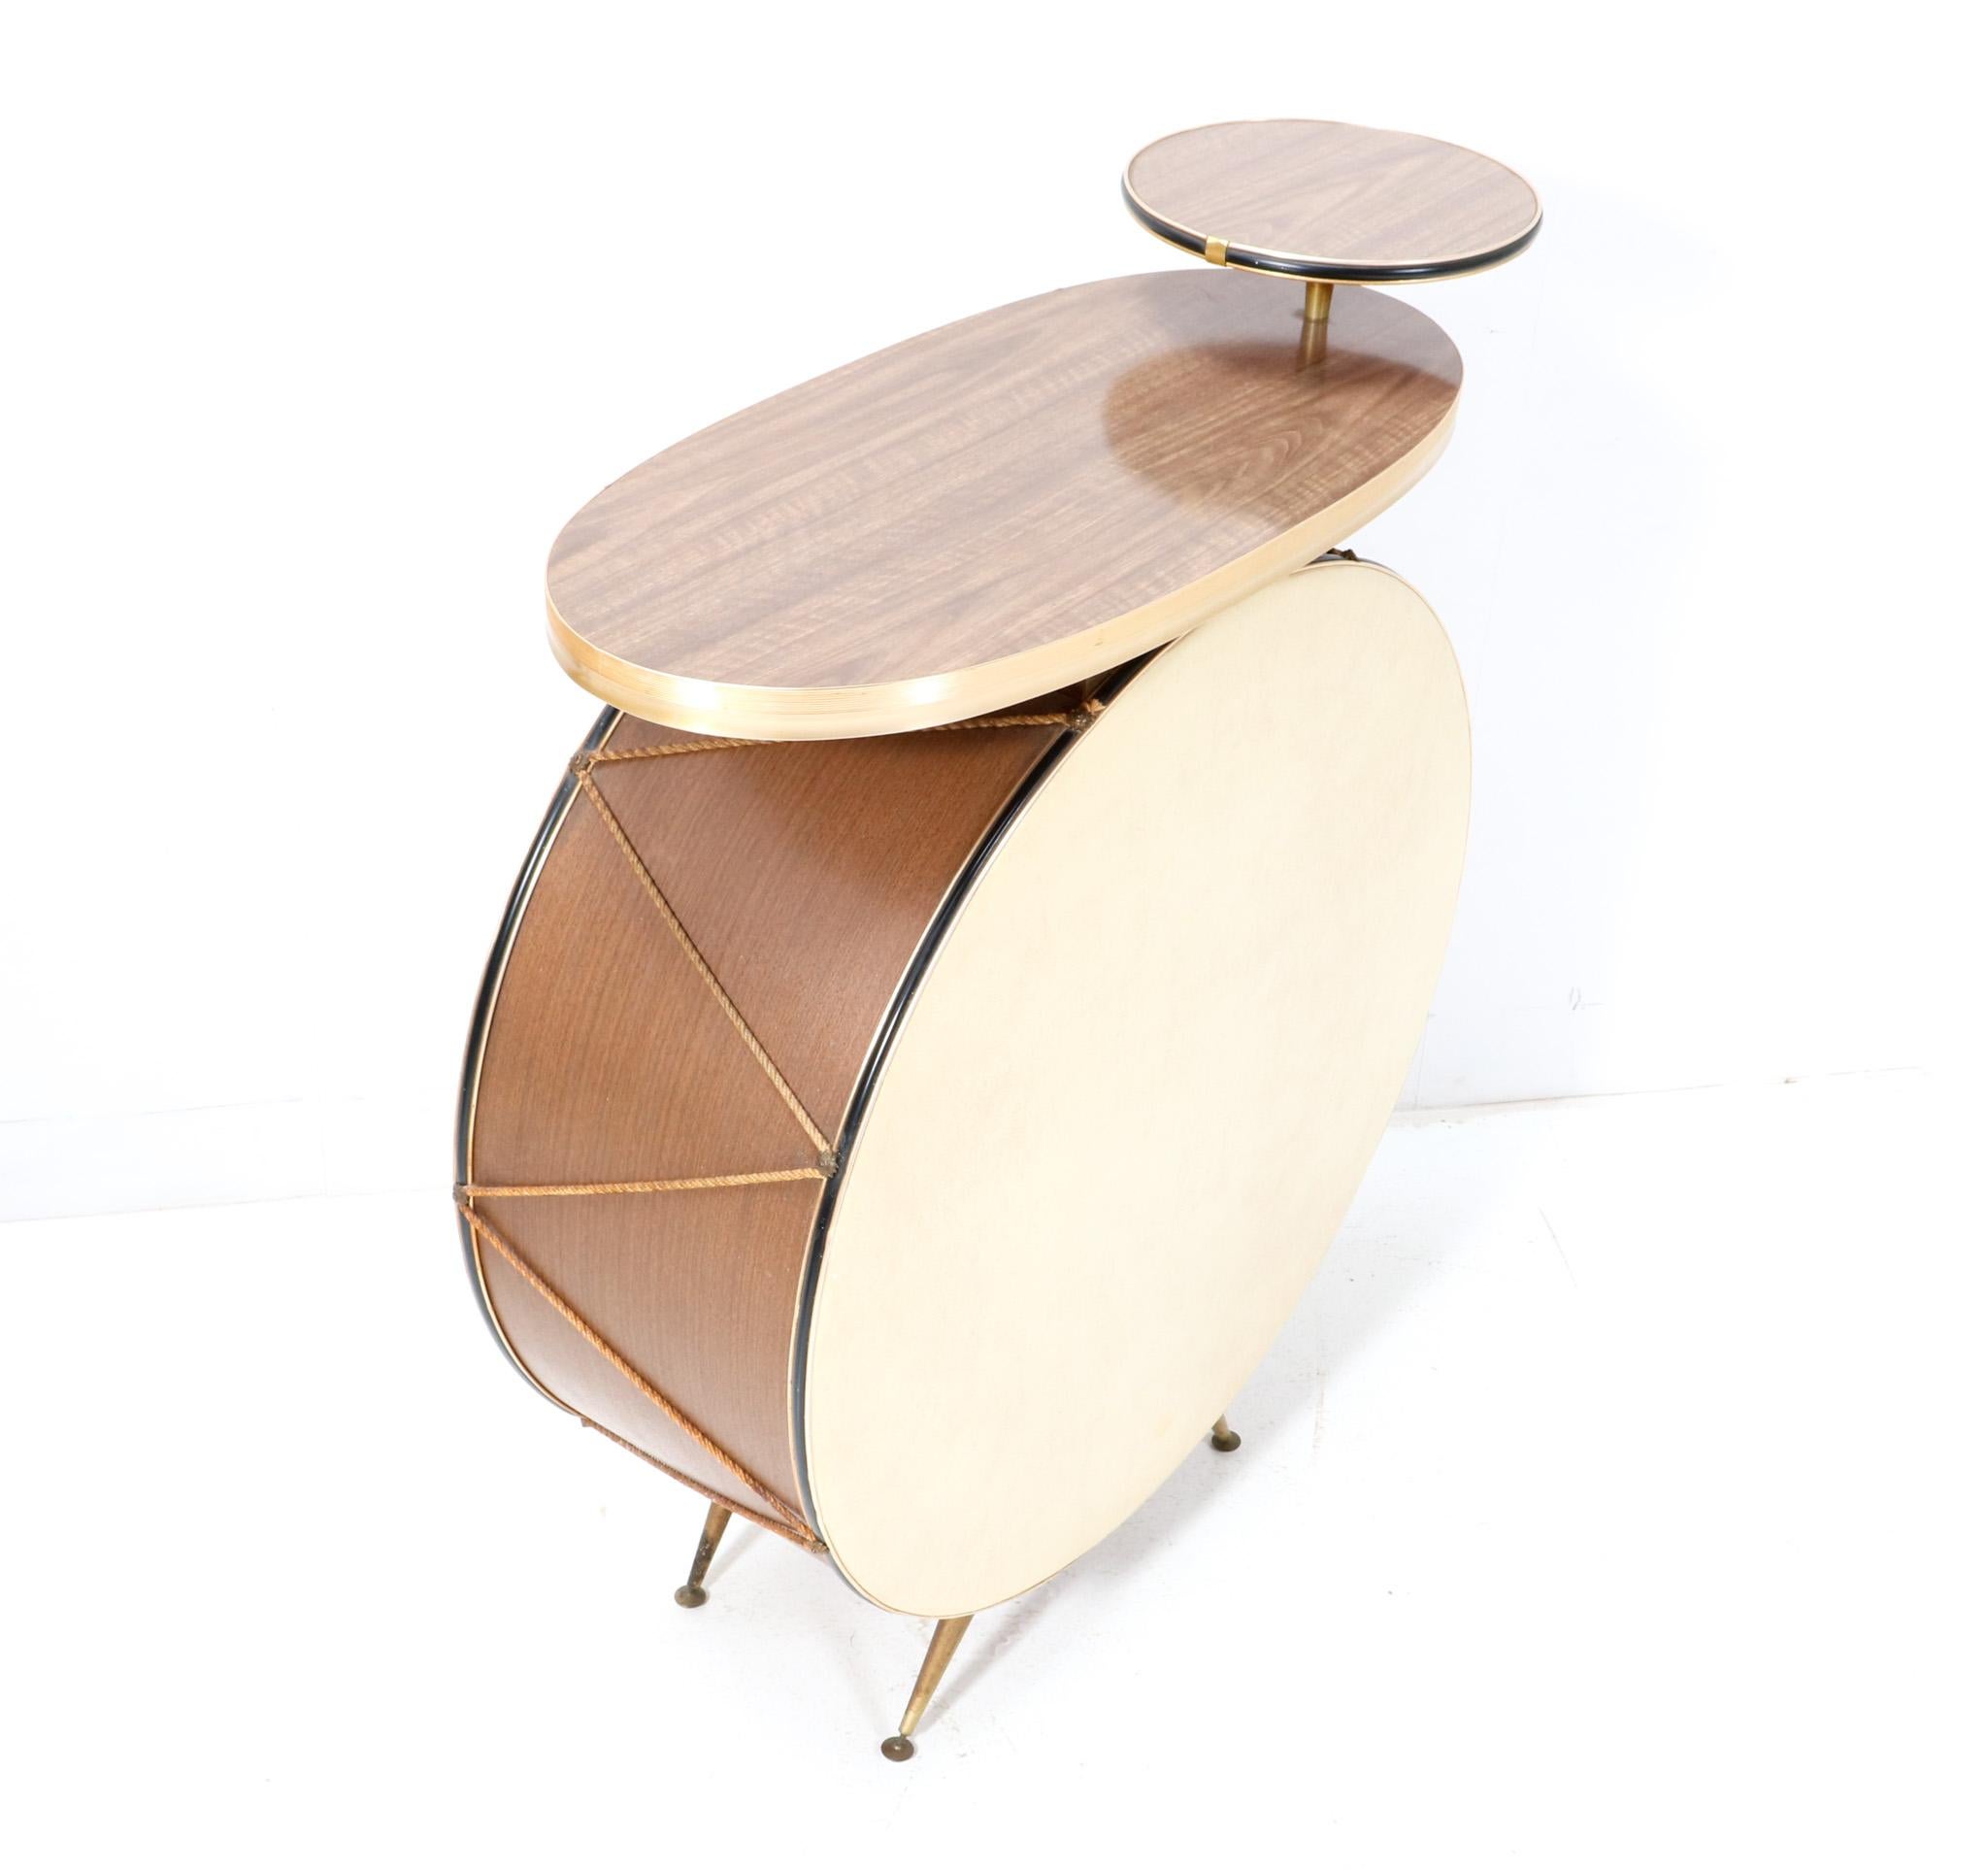 Mid-20th Century English Mid-Century Modern Drum Dry Bar by Barget Built, 1960s